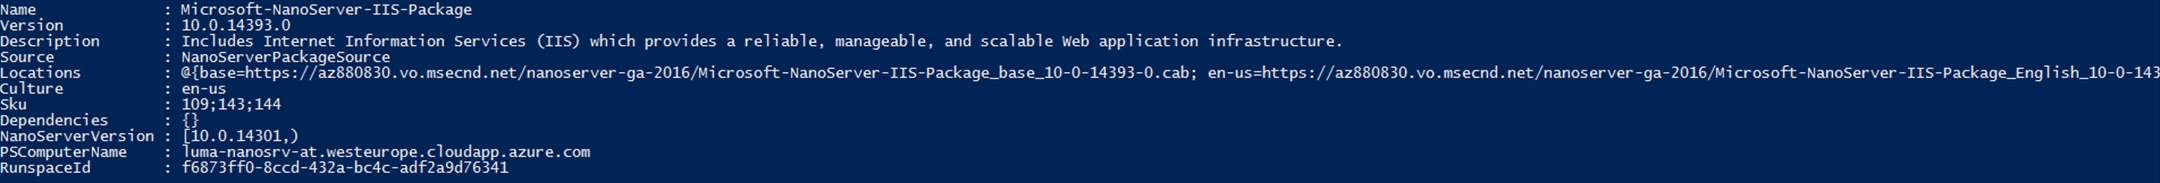 continuous-deployment-to-nano-server-in-azure-p1-008